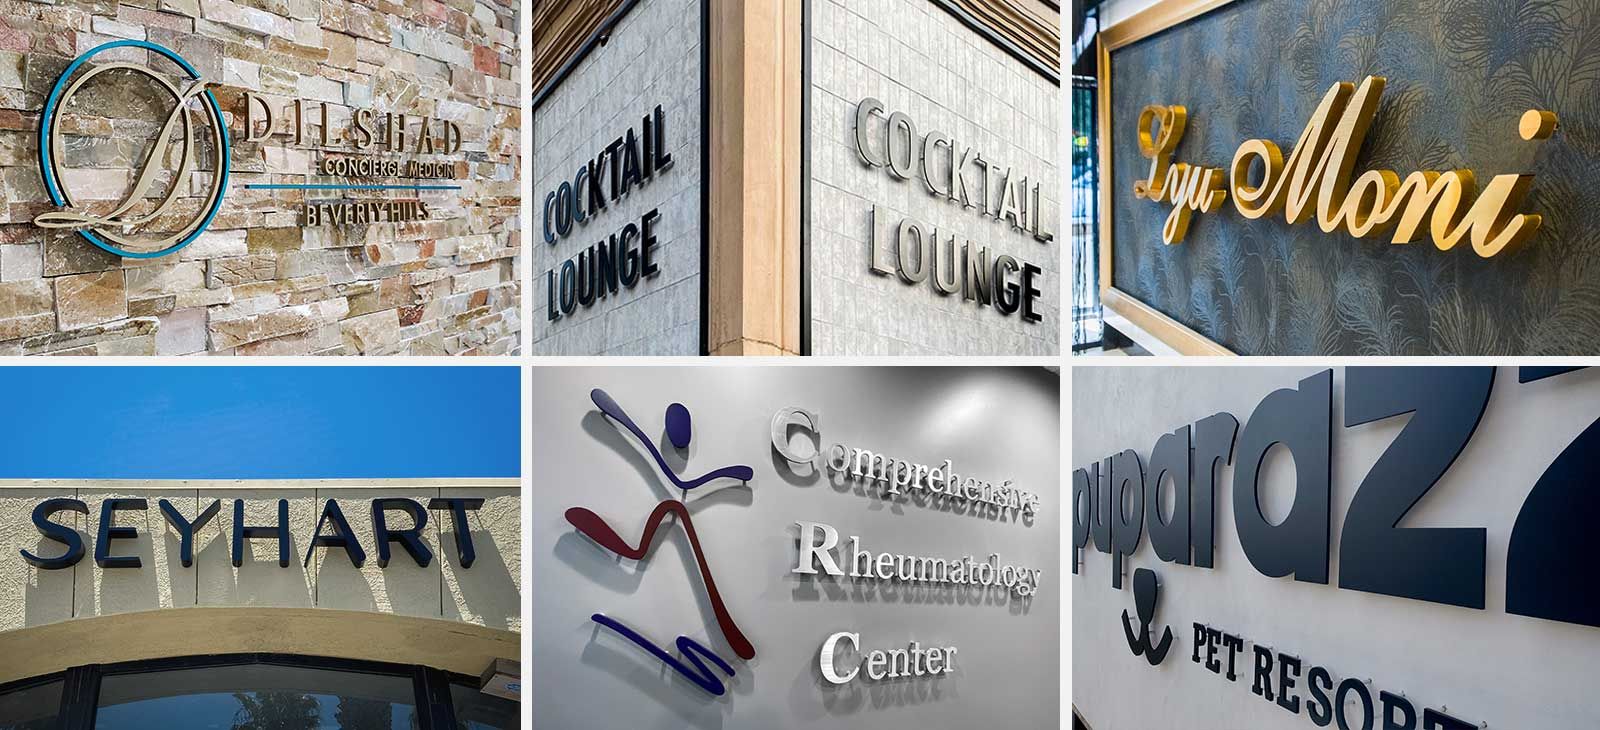 Pin-mounted letters in different colors displaying brand names and logos indoors and outdoors